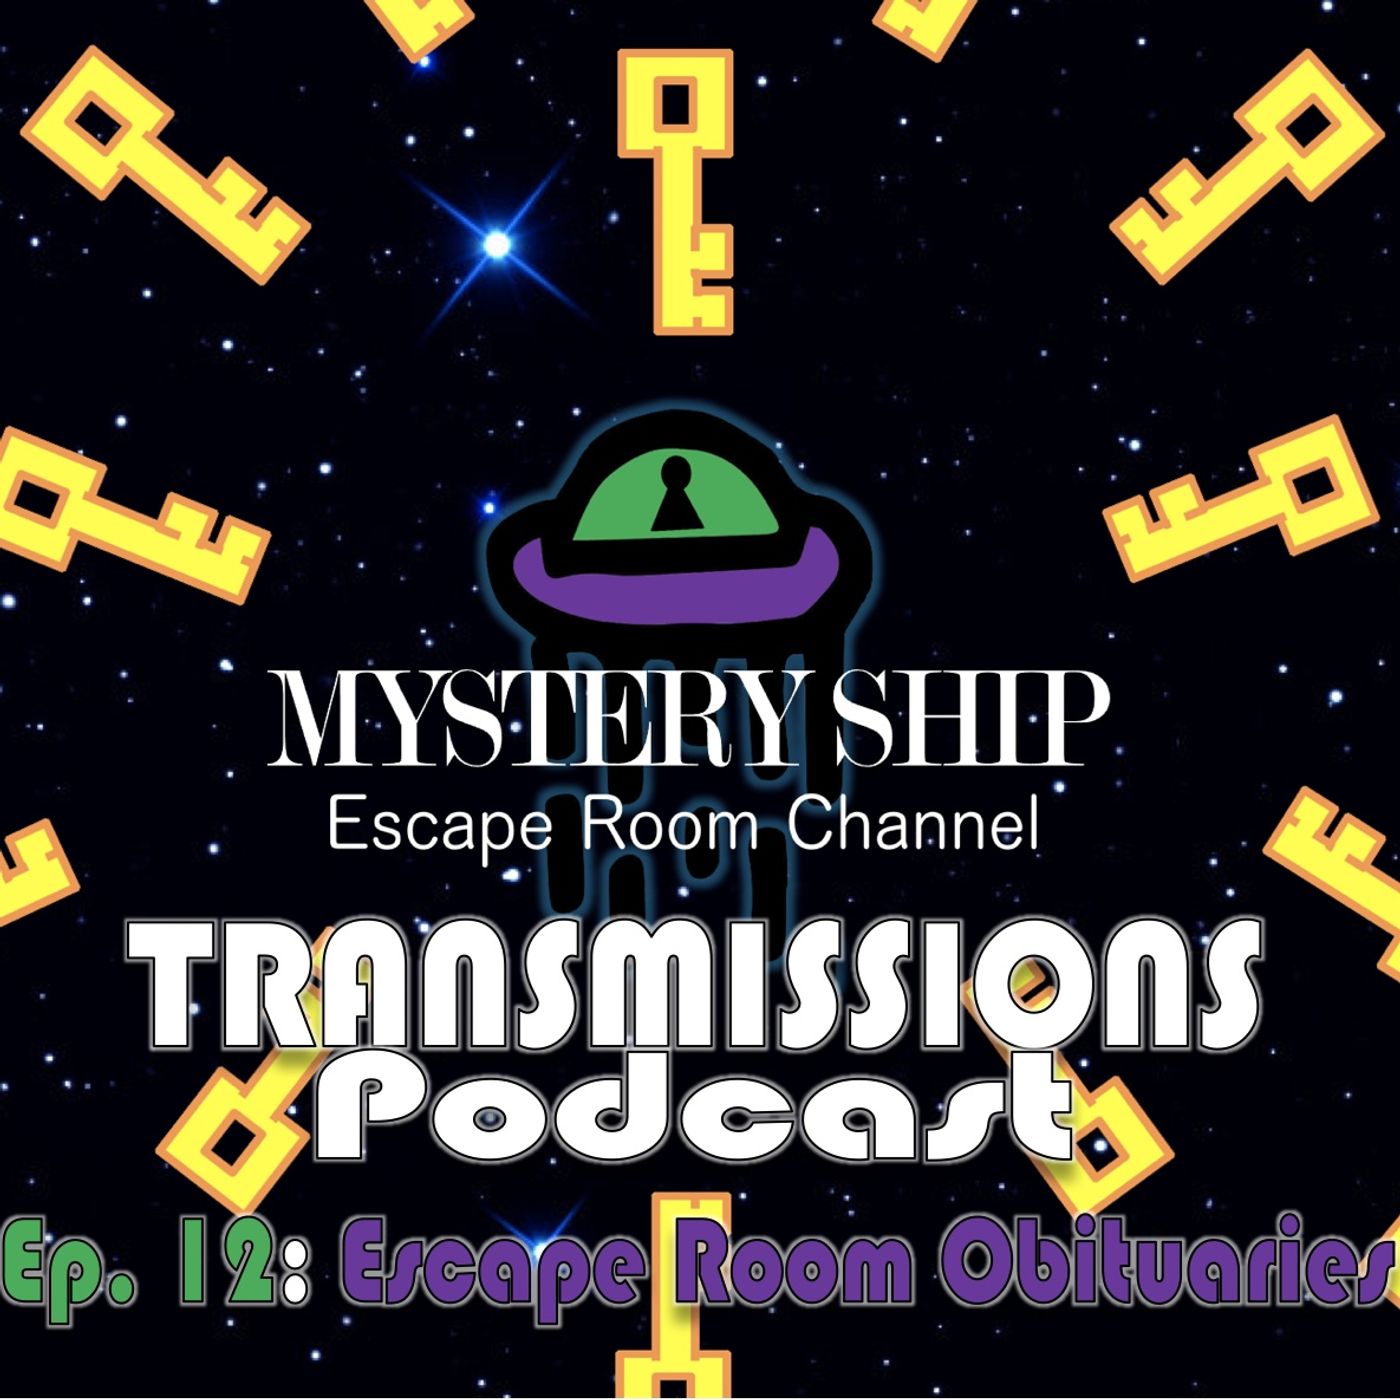 Ep12 Escape Room Obituaries - Mystery Ship Transmissions Podcast